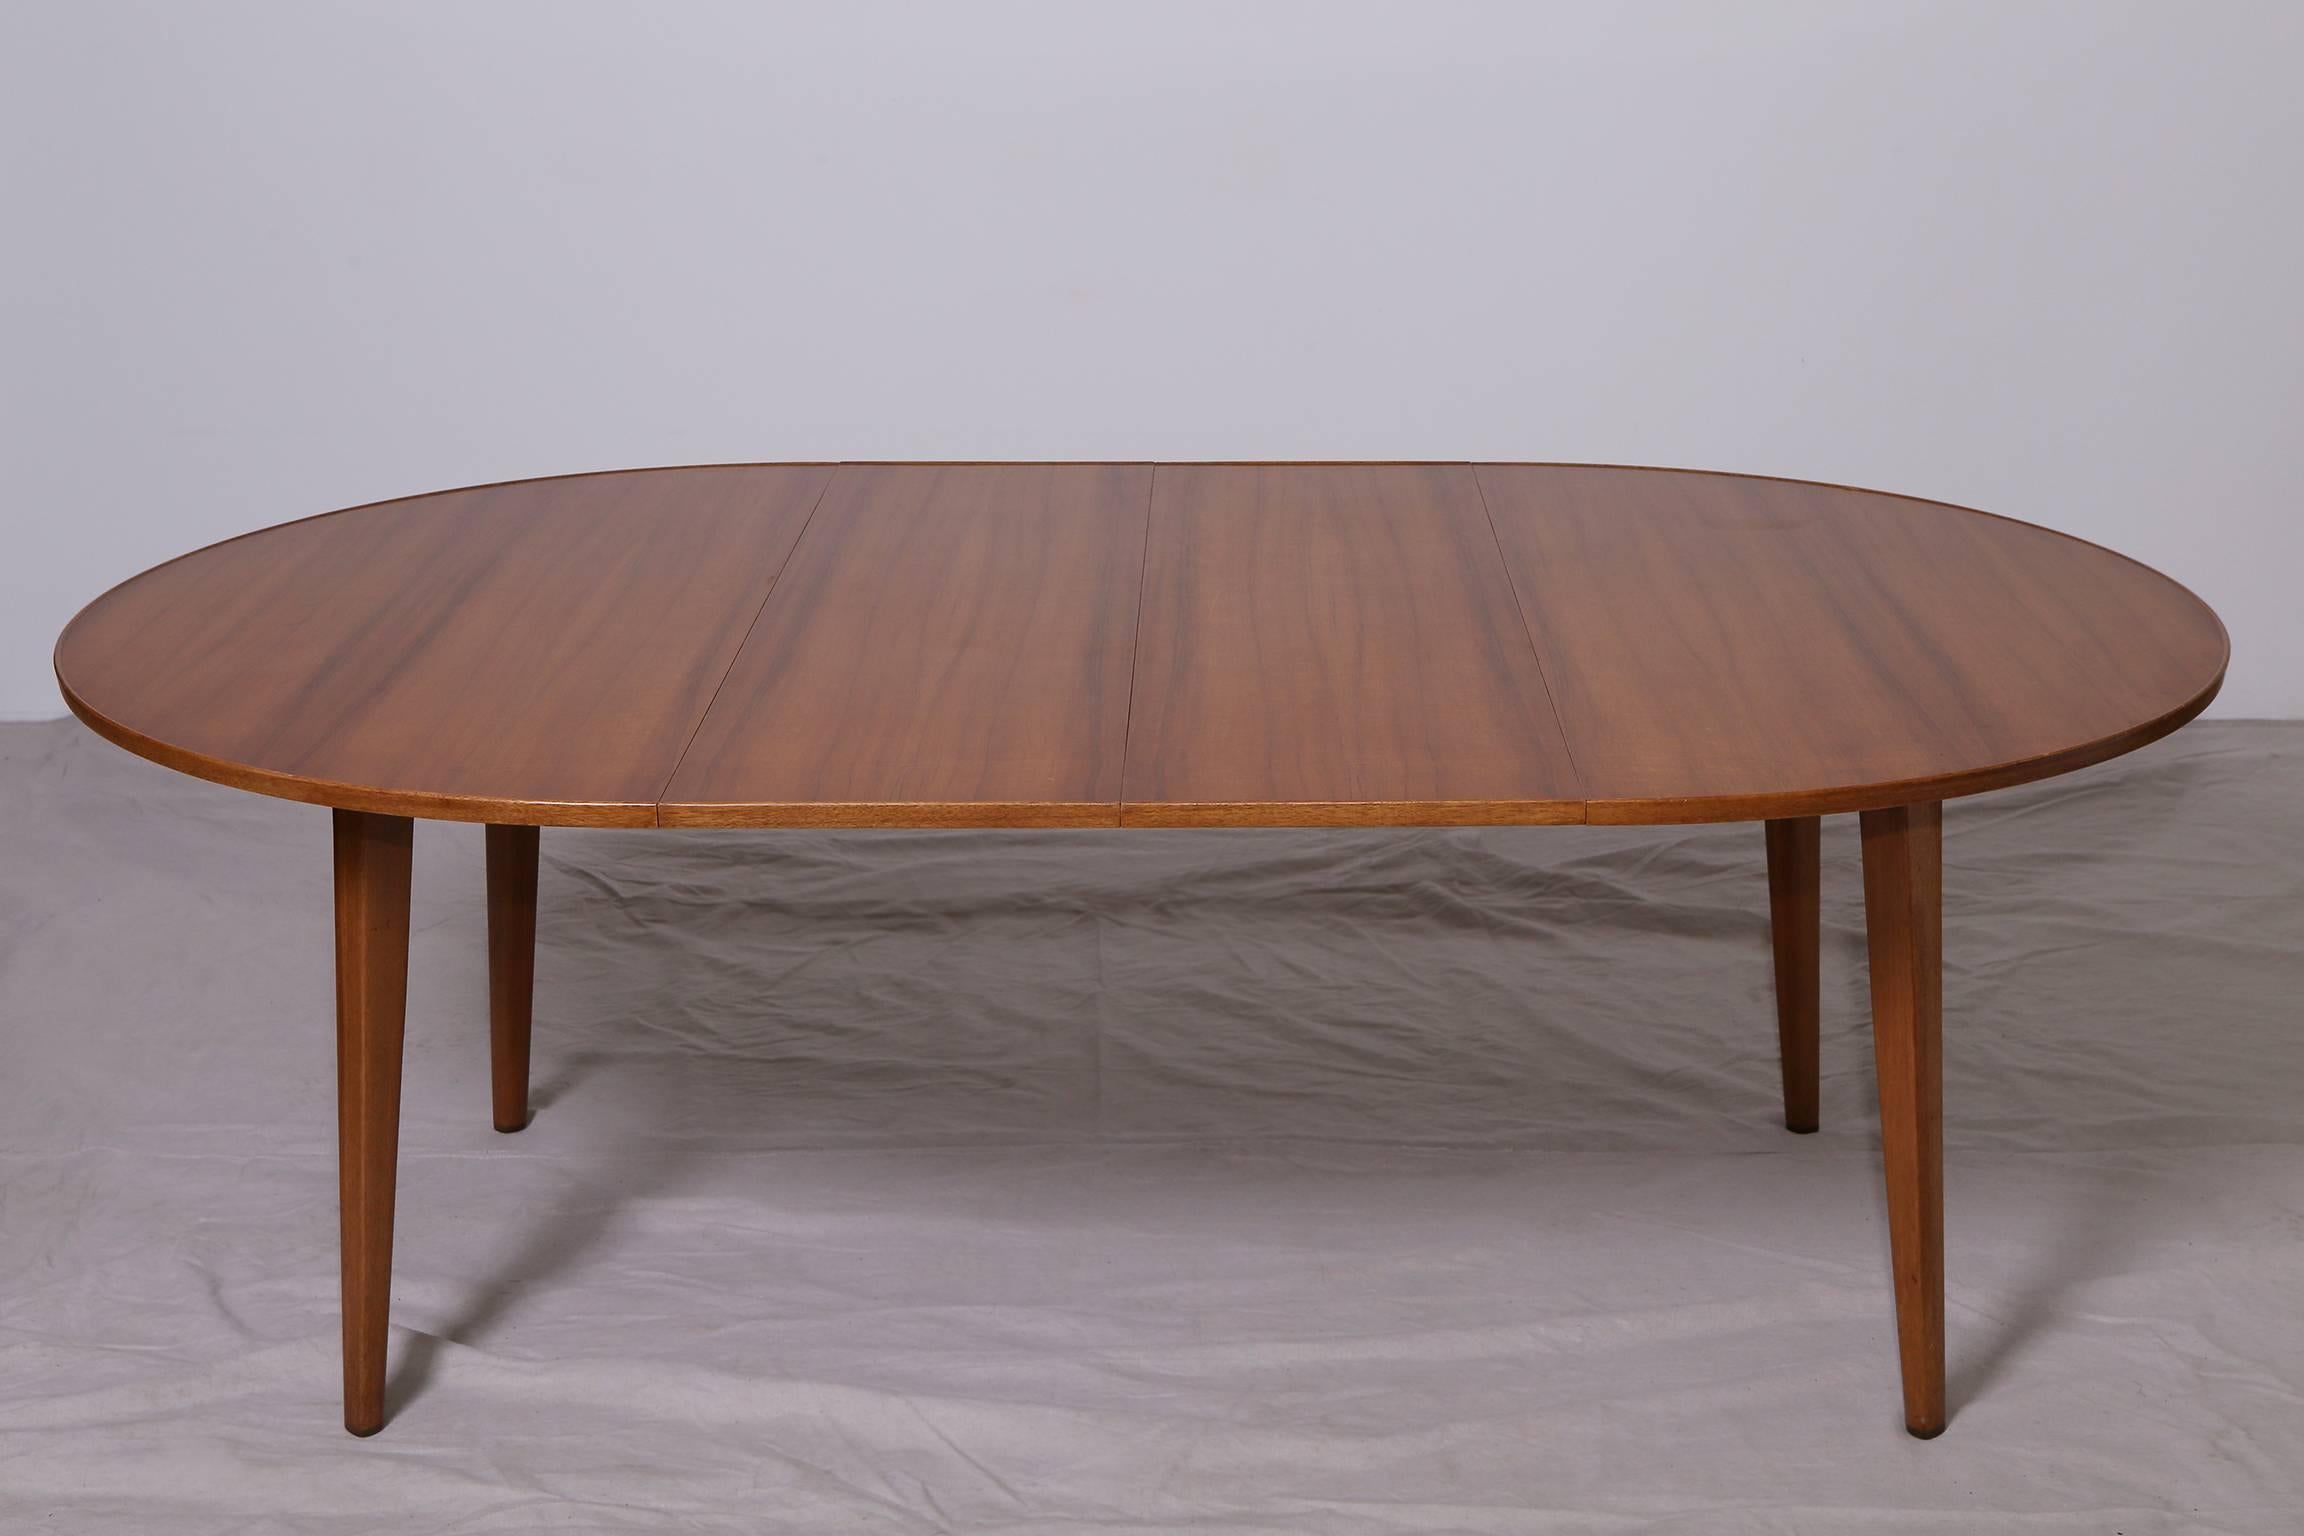 American Bleached Mahogany Dining Table by Edward Wormley for Dunbar